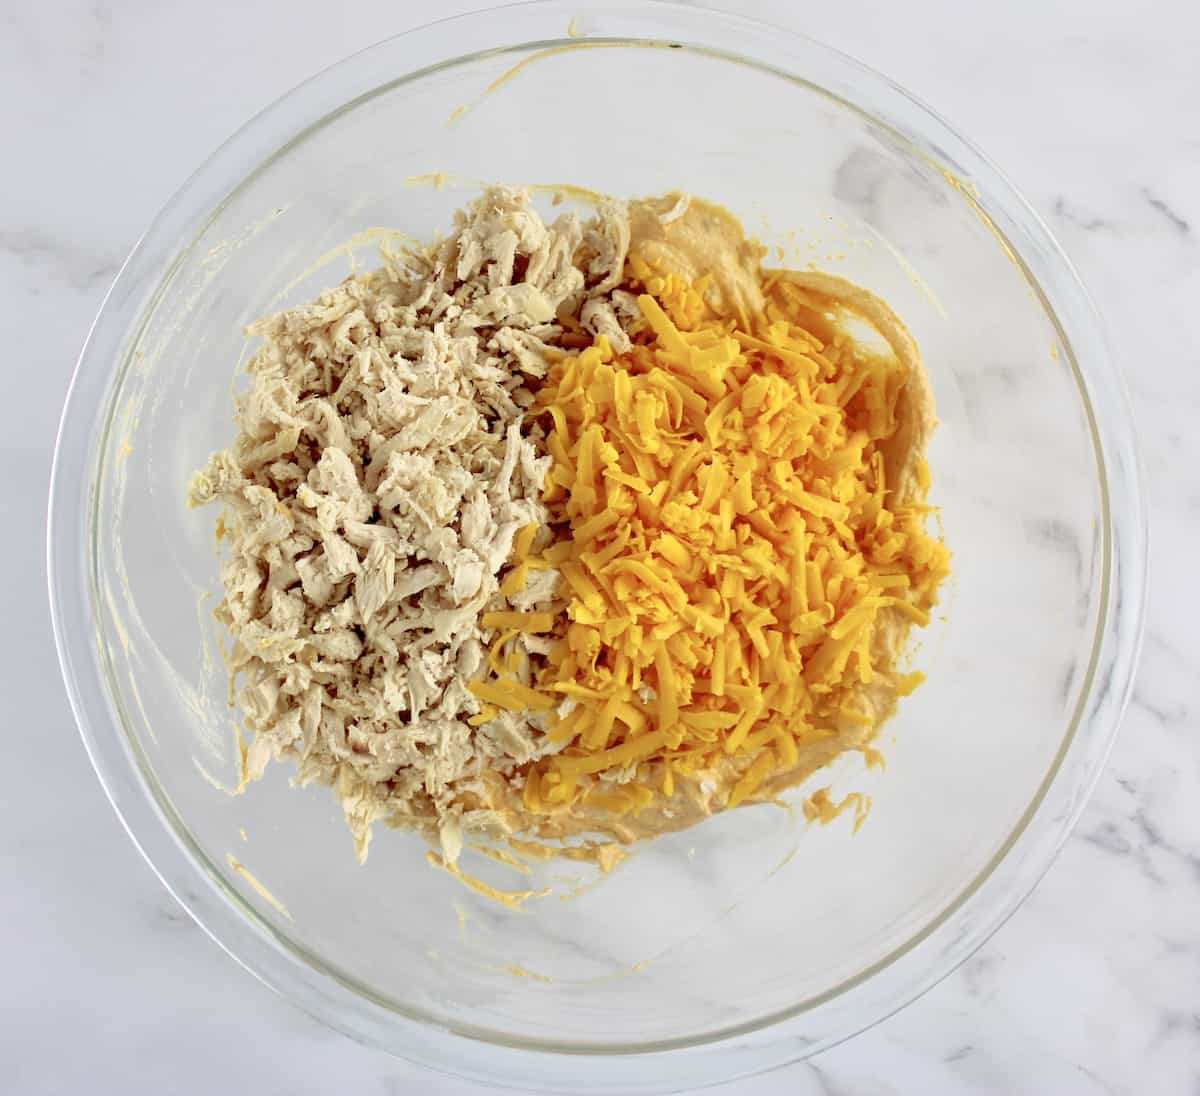 shredded chicken and cheddar cheese in glass bowl